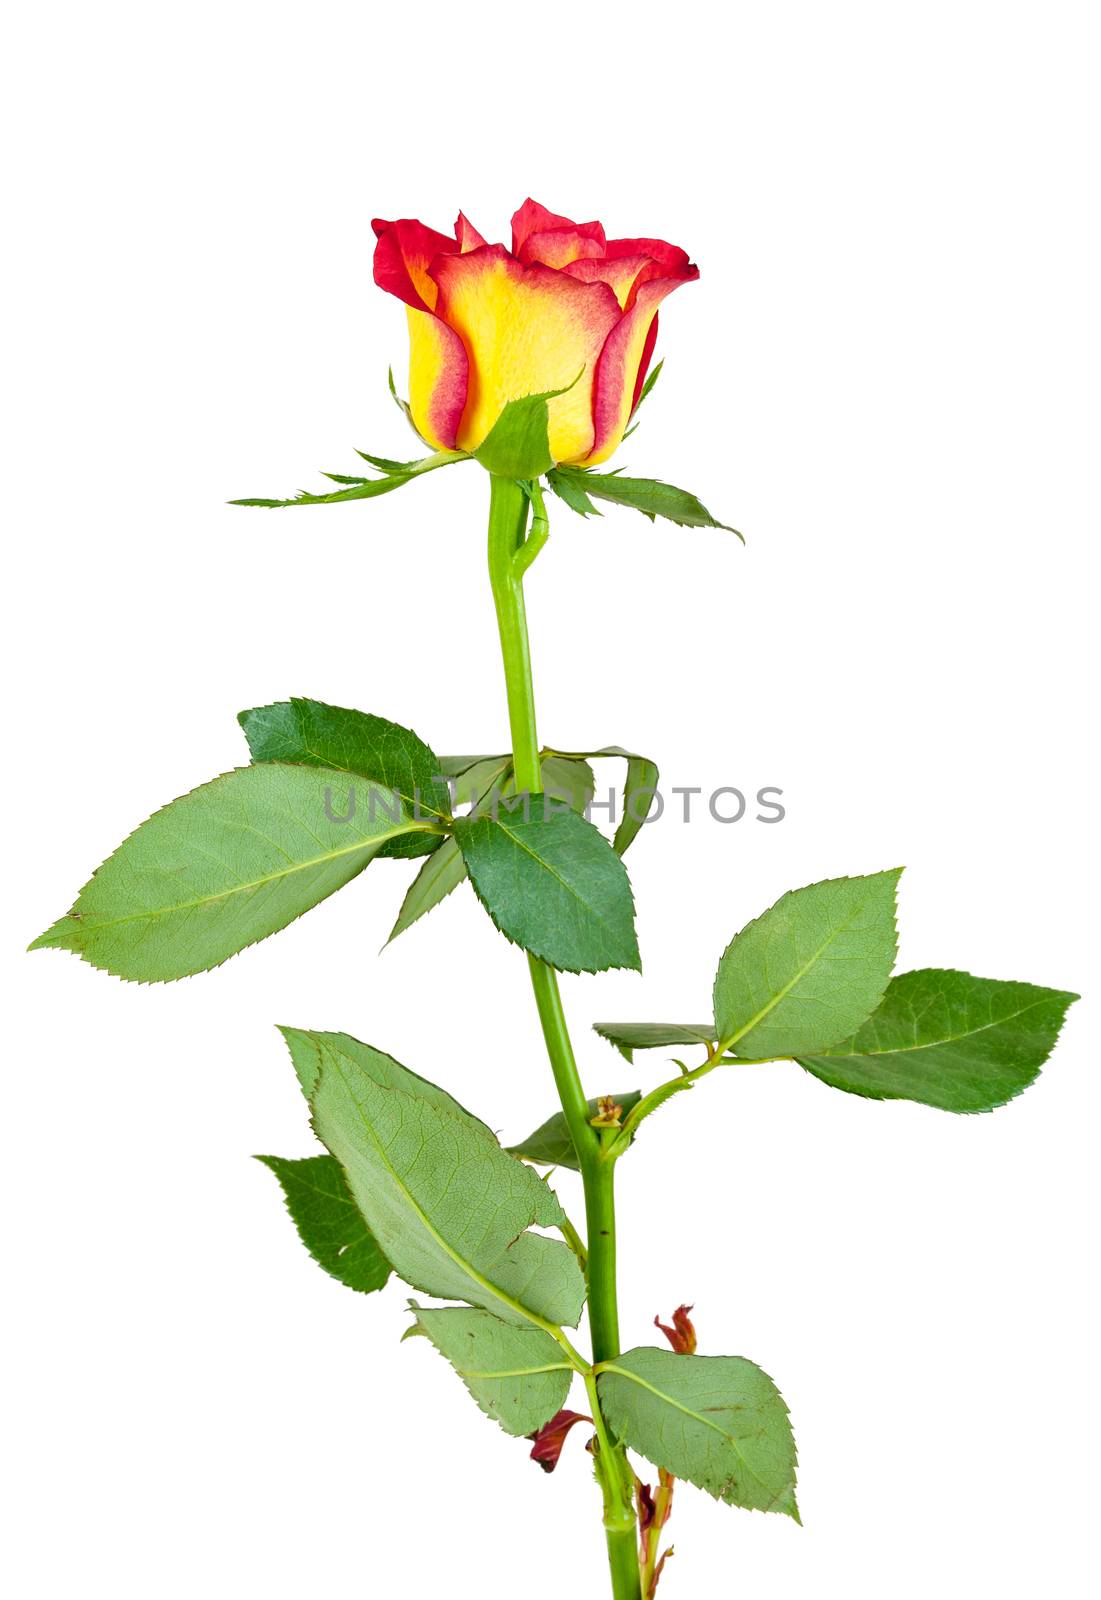 Red yellow rose flower on white background by mkos83